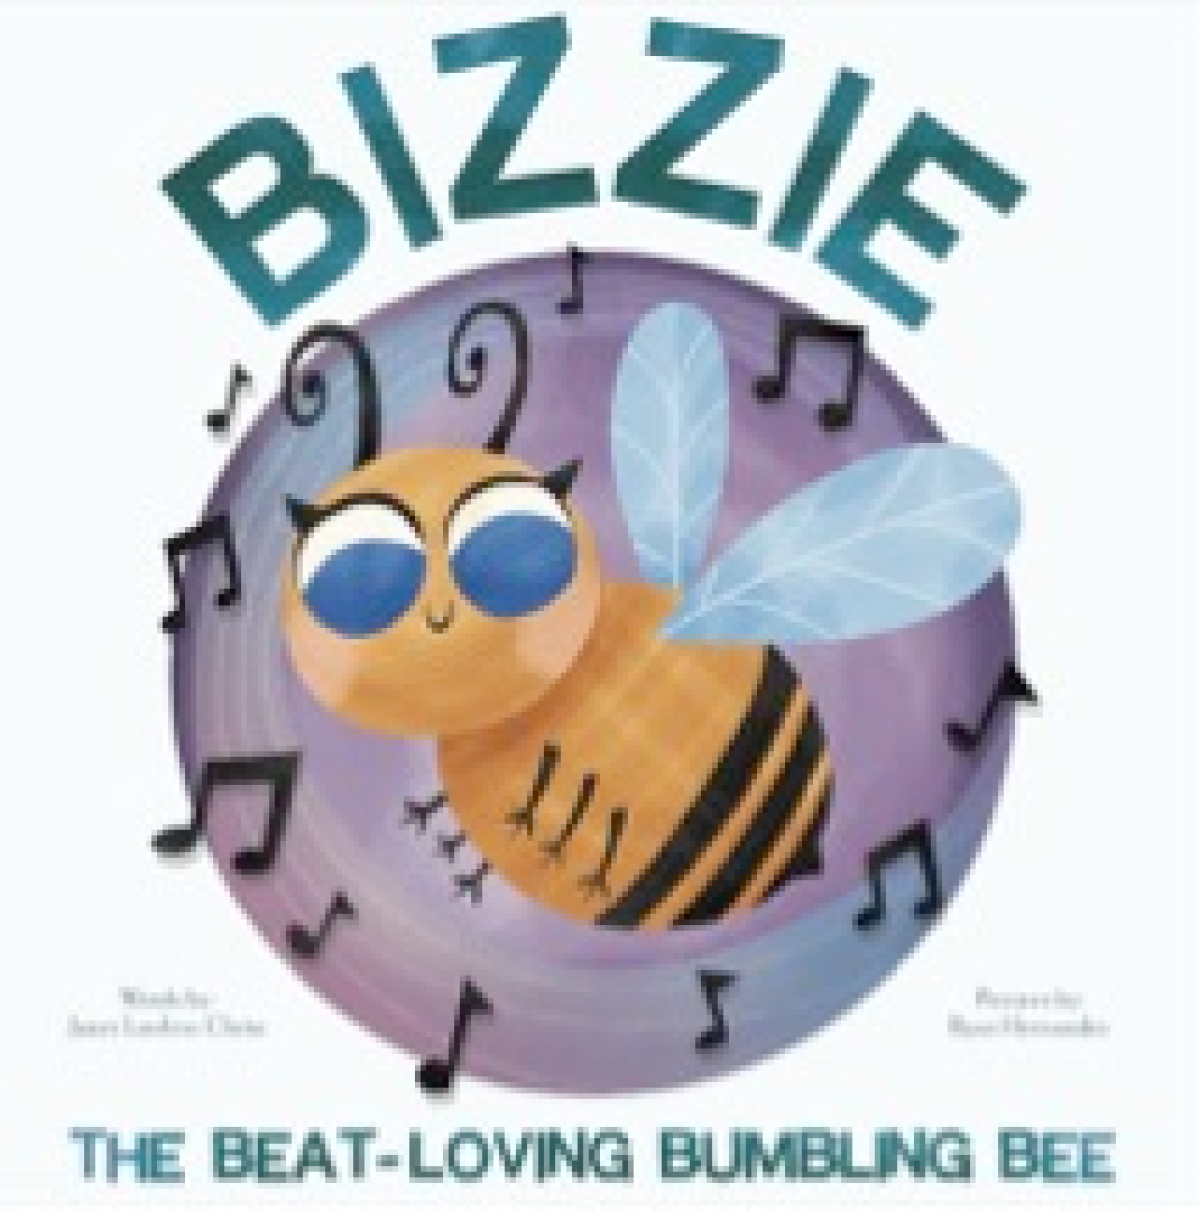 The cover of Bizzie: The Beat-Loving Bumbling Bee